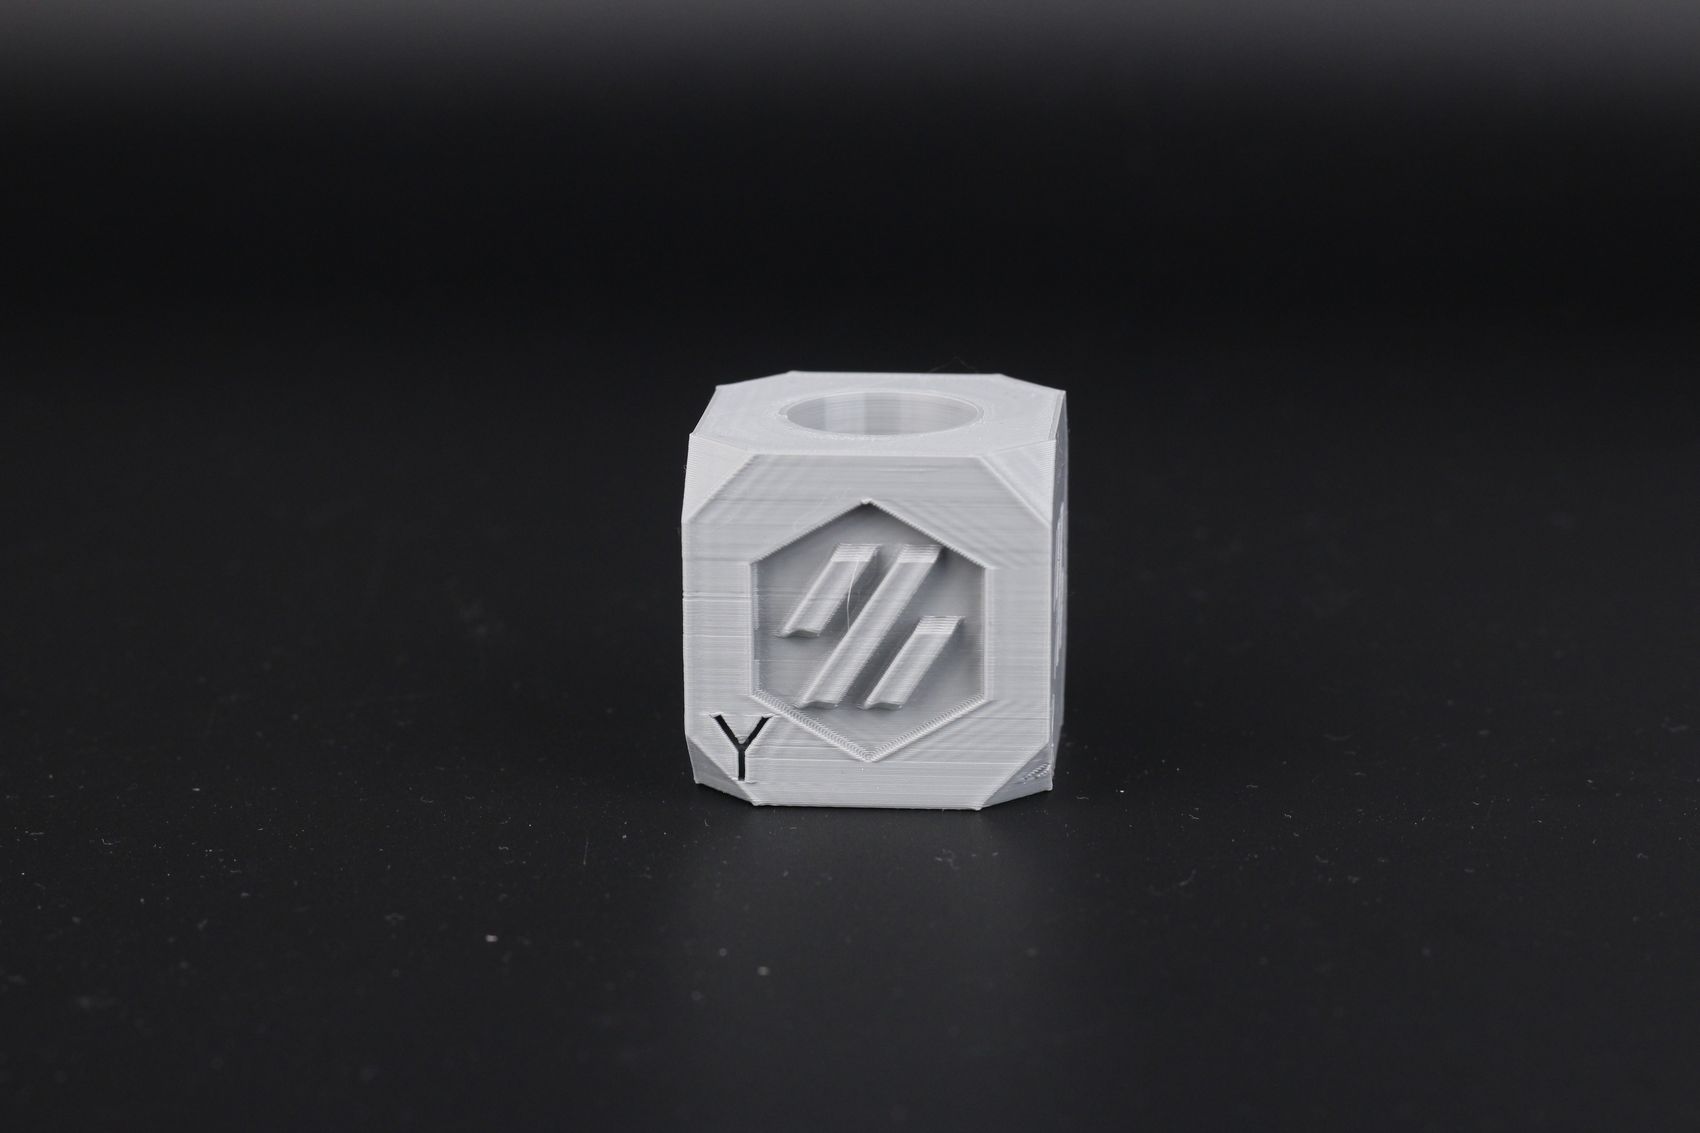 Voron Calibration Cube on Anycubic Kobra Plus4 | Anycubic Kobra Plus Review: A Larger Vyper